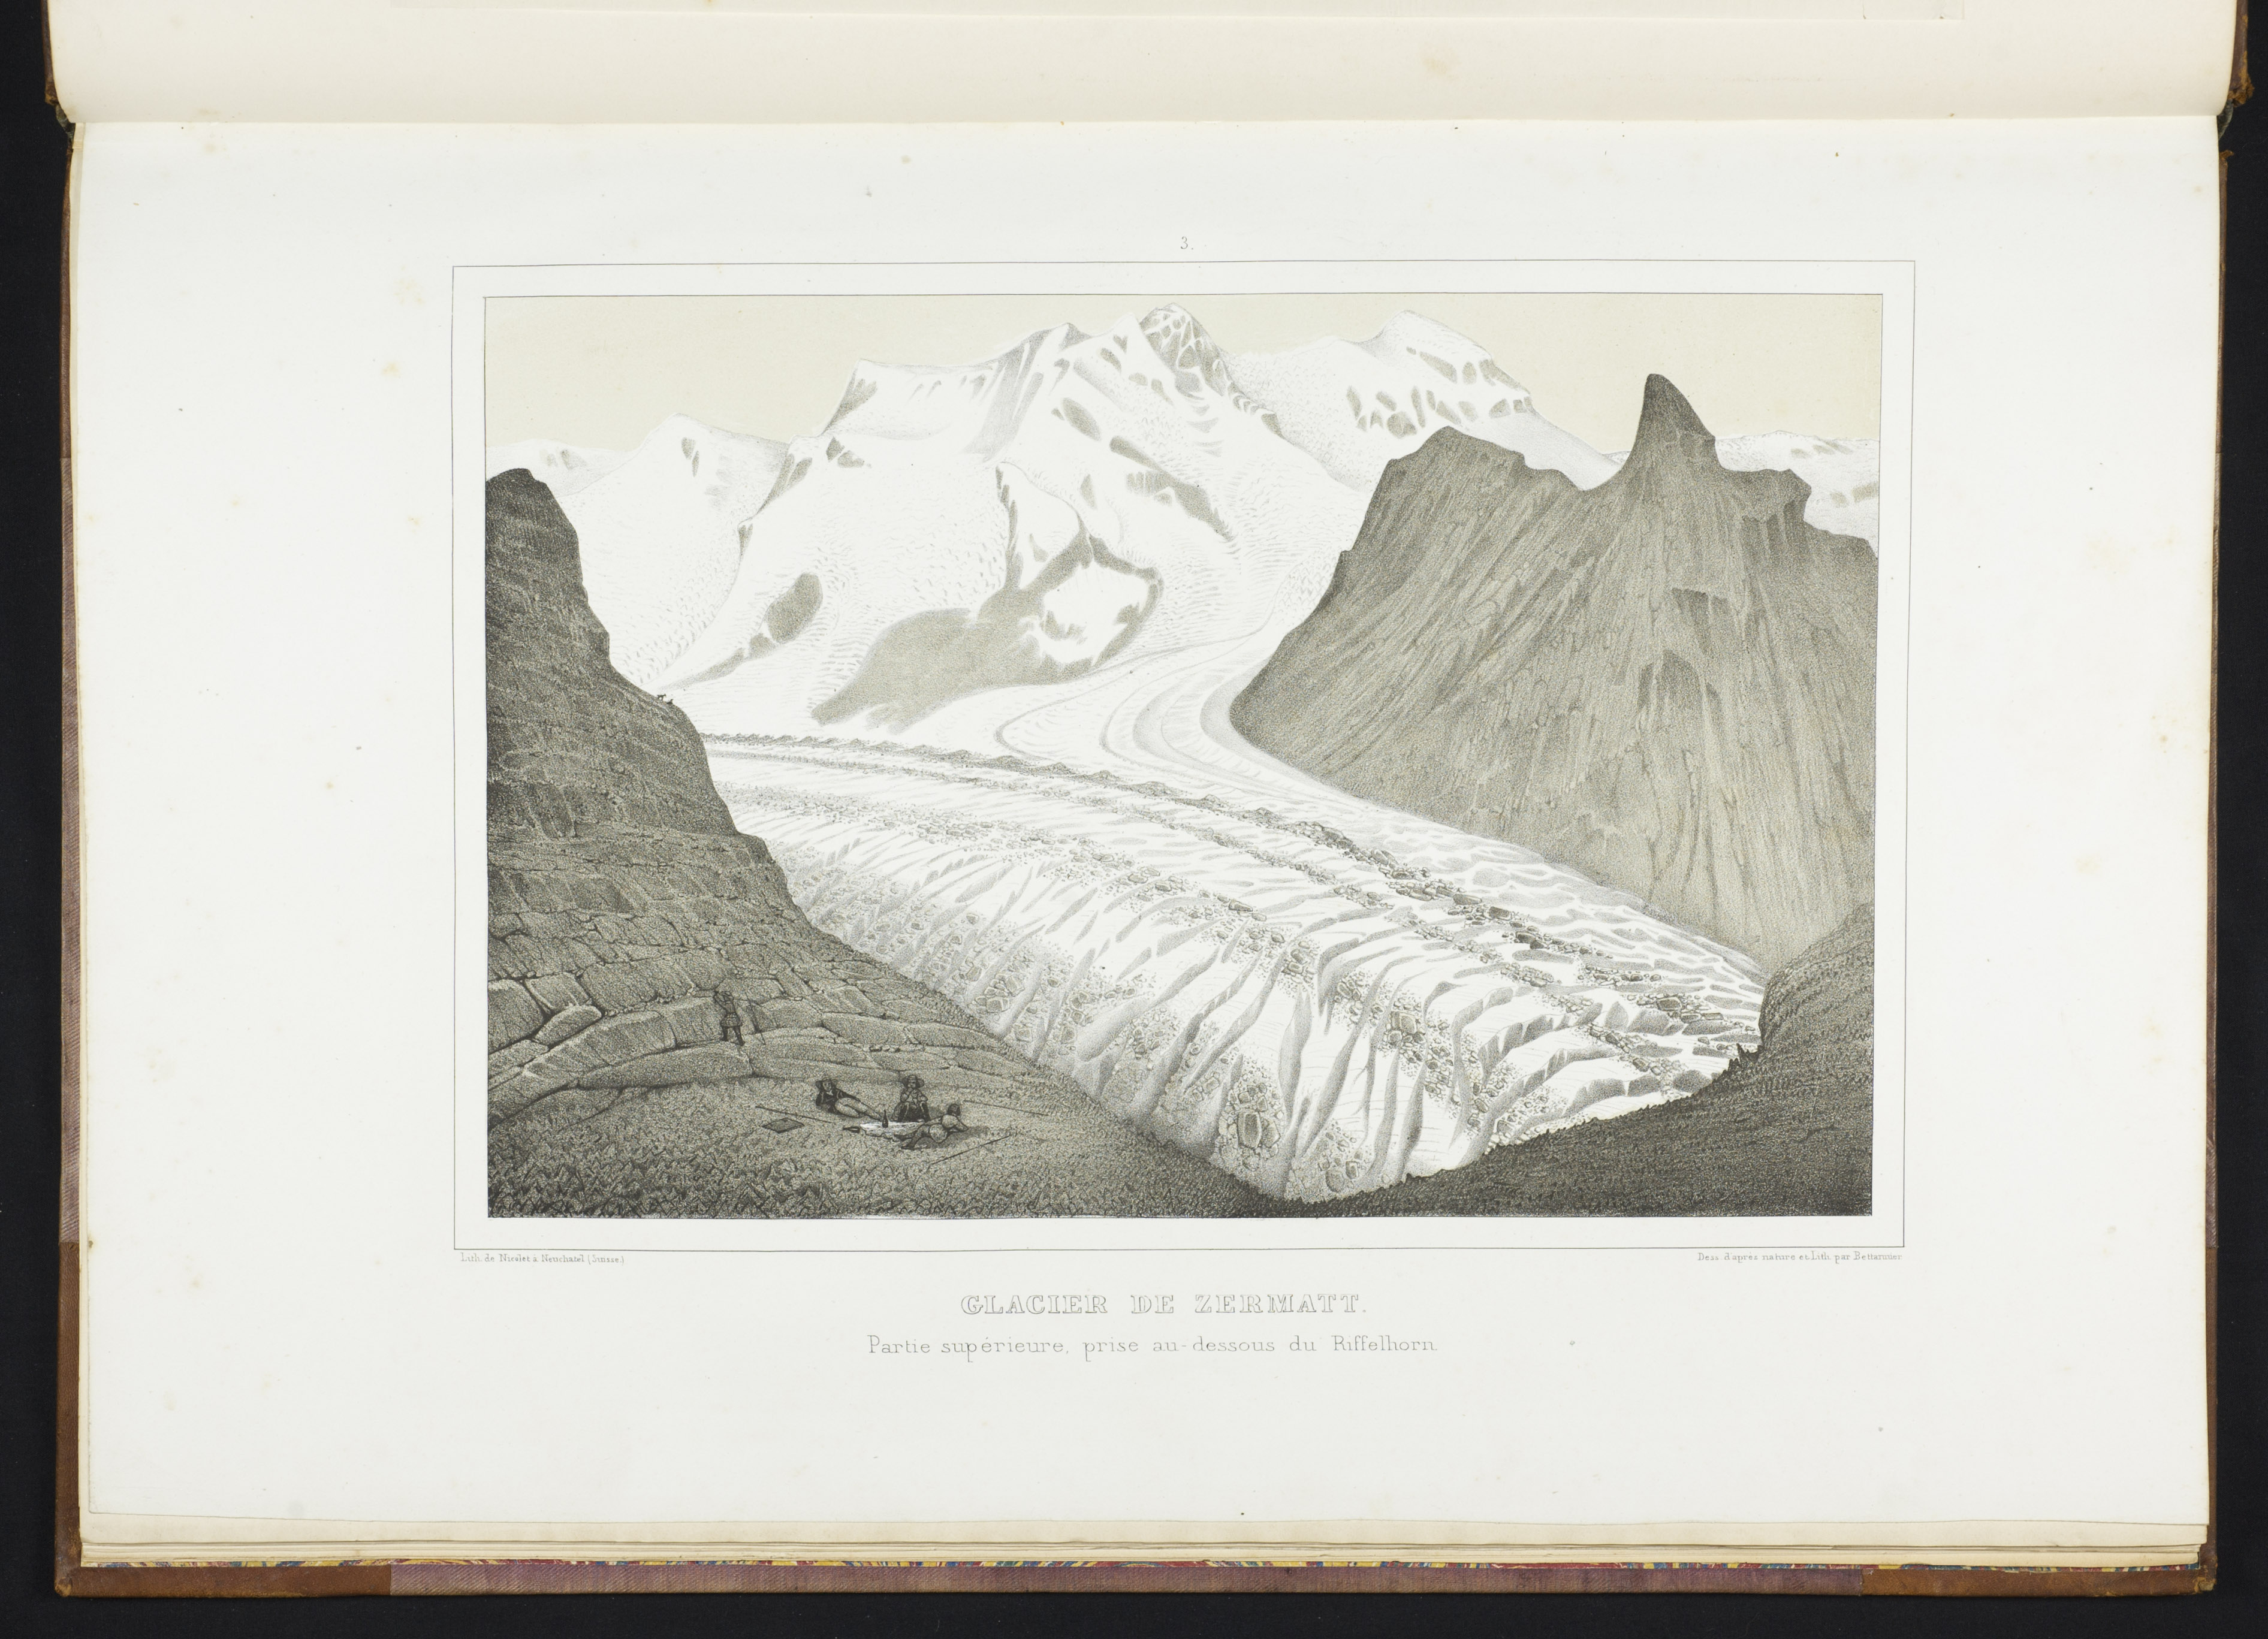 Engraving of a glacier in the Alps, with small human figures in the foreground.